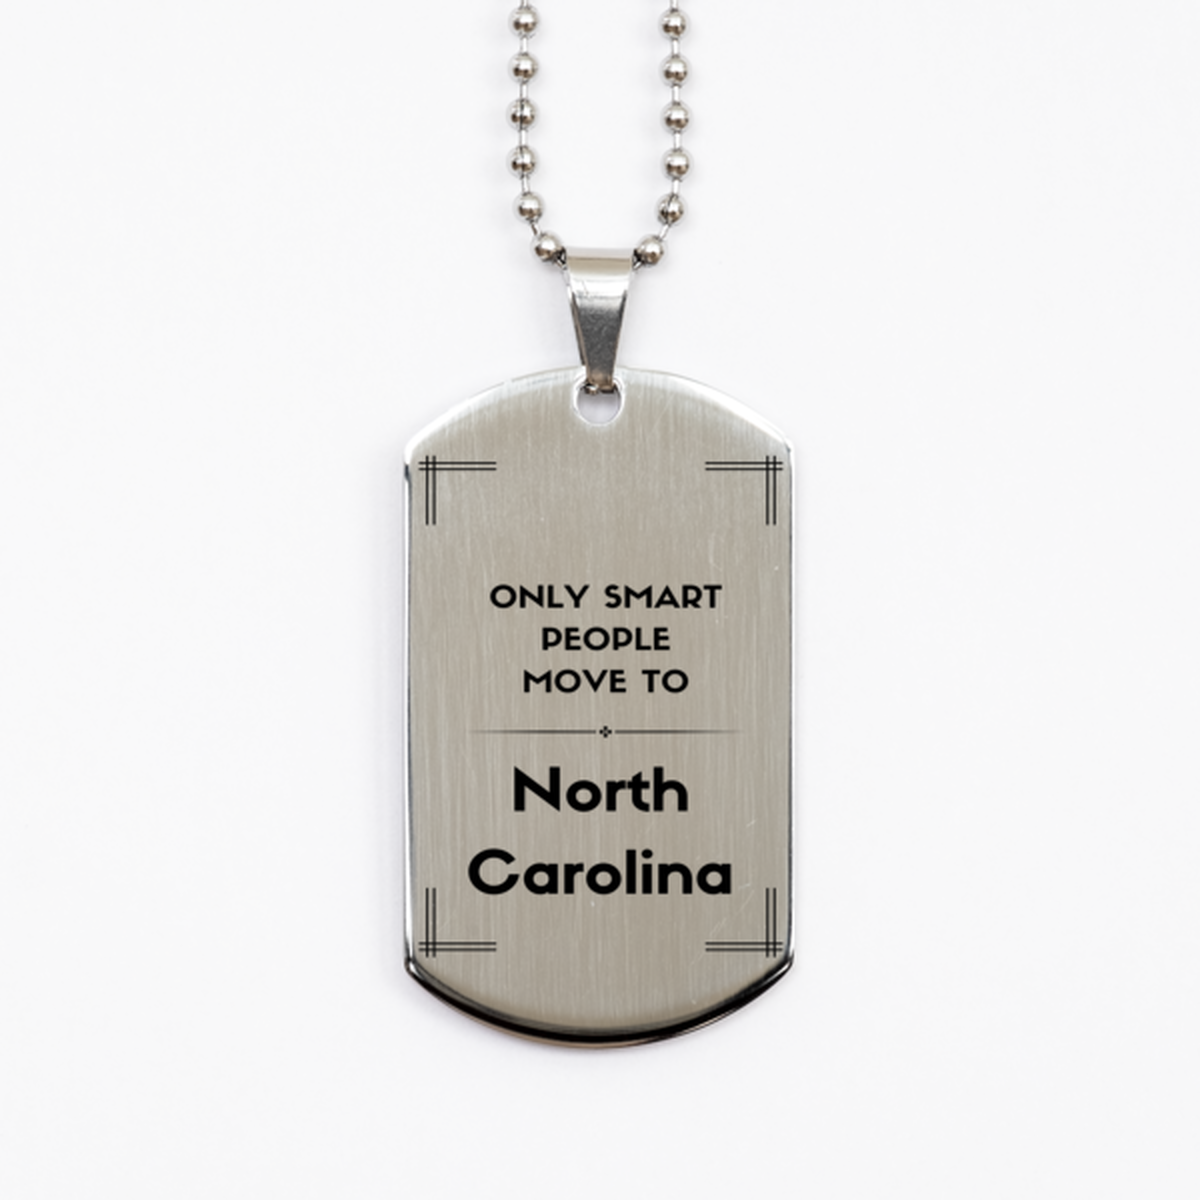 Only smart people move to North Carolina Silver Dog Tag, Gag Gifts For North Carolina, Move to North Carolina Gifts for Friends Coworker Funny Saying Quote